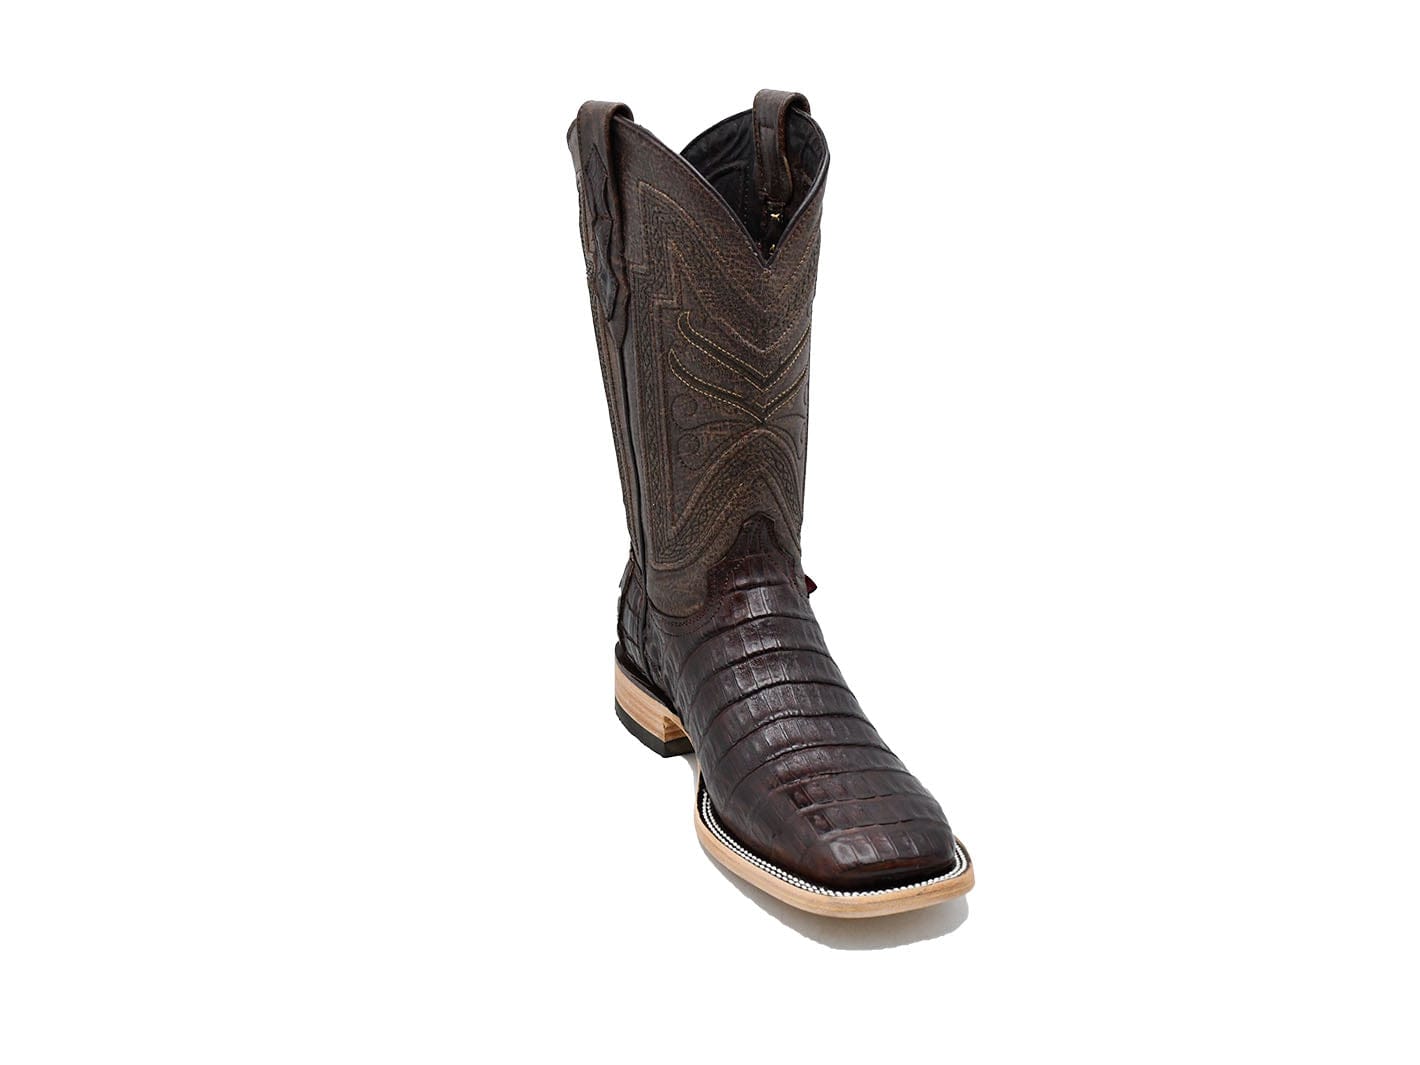 Texas Country Exotic Boot Cola Caiman Belly Tabacco Square Toe LM10